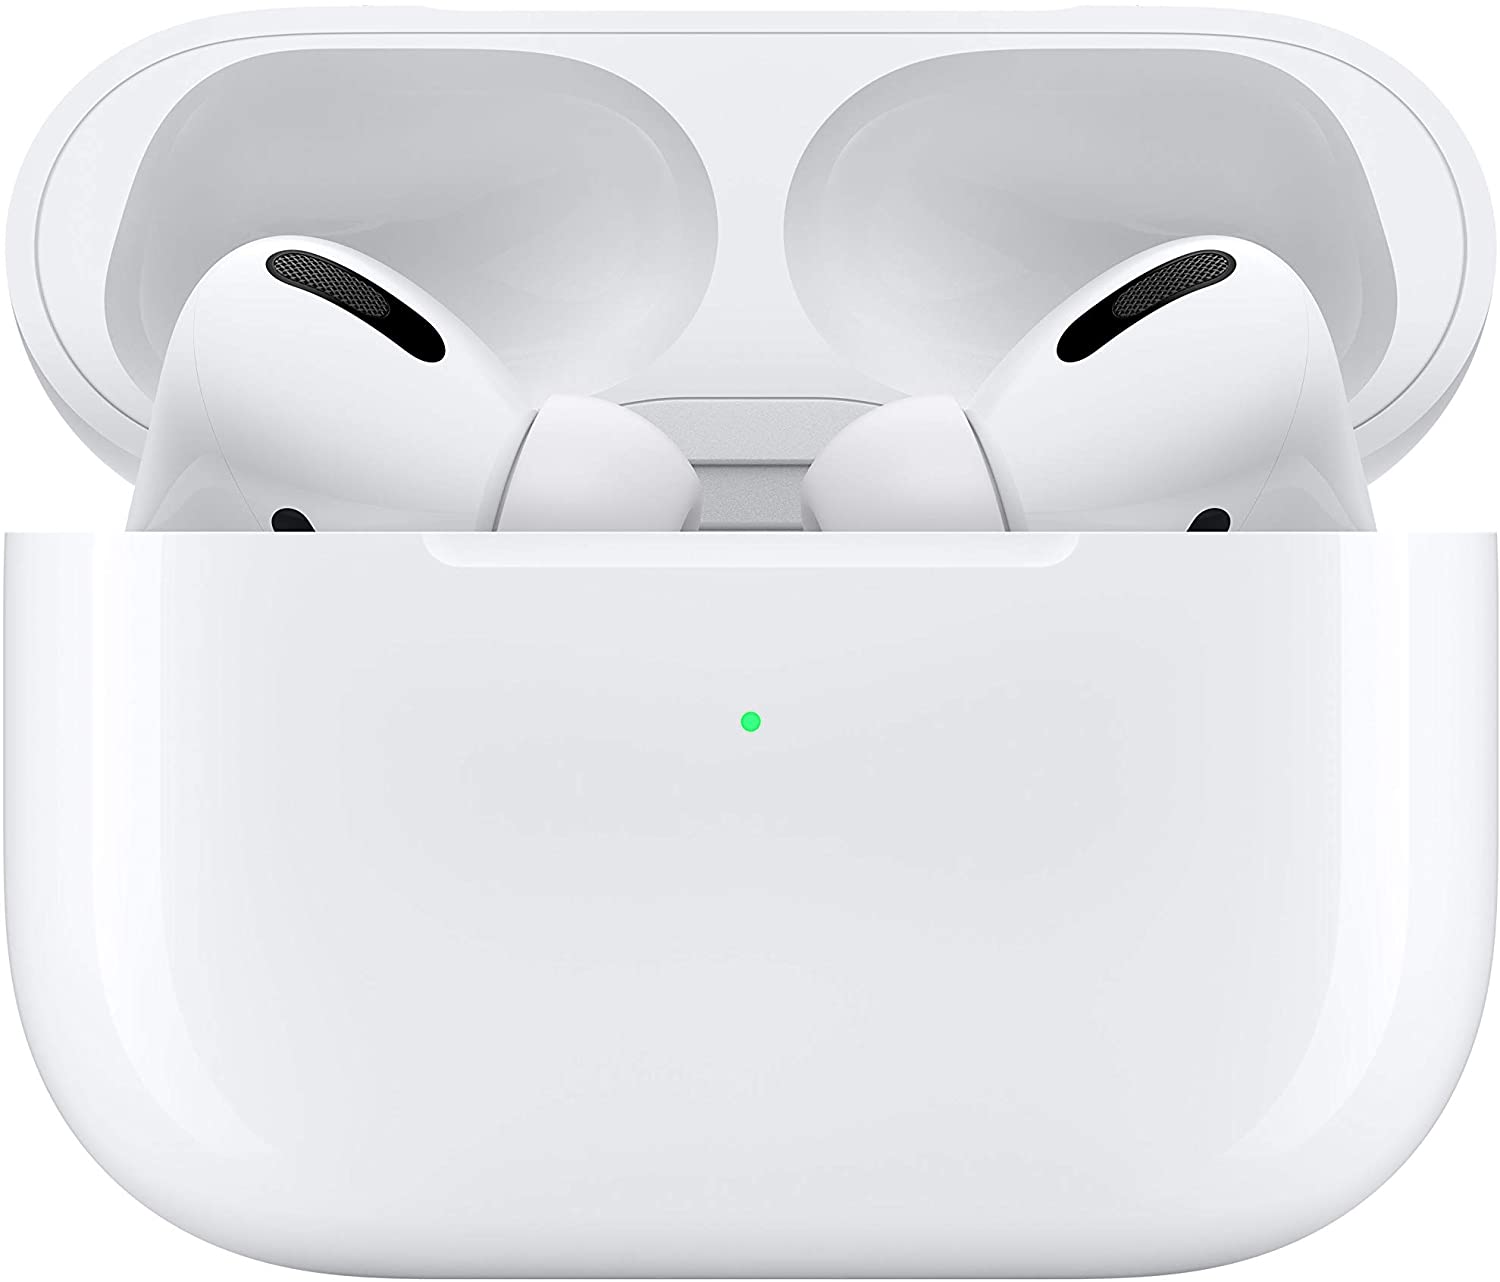 Apple AirPods Pro $189.98 free shipping from Amazon - $189.98